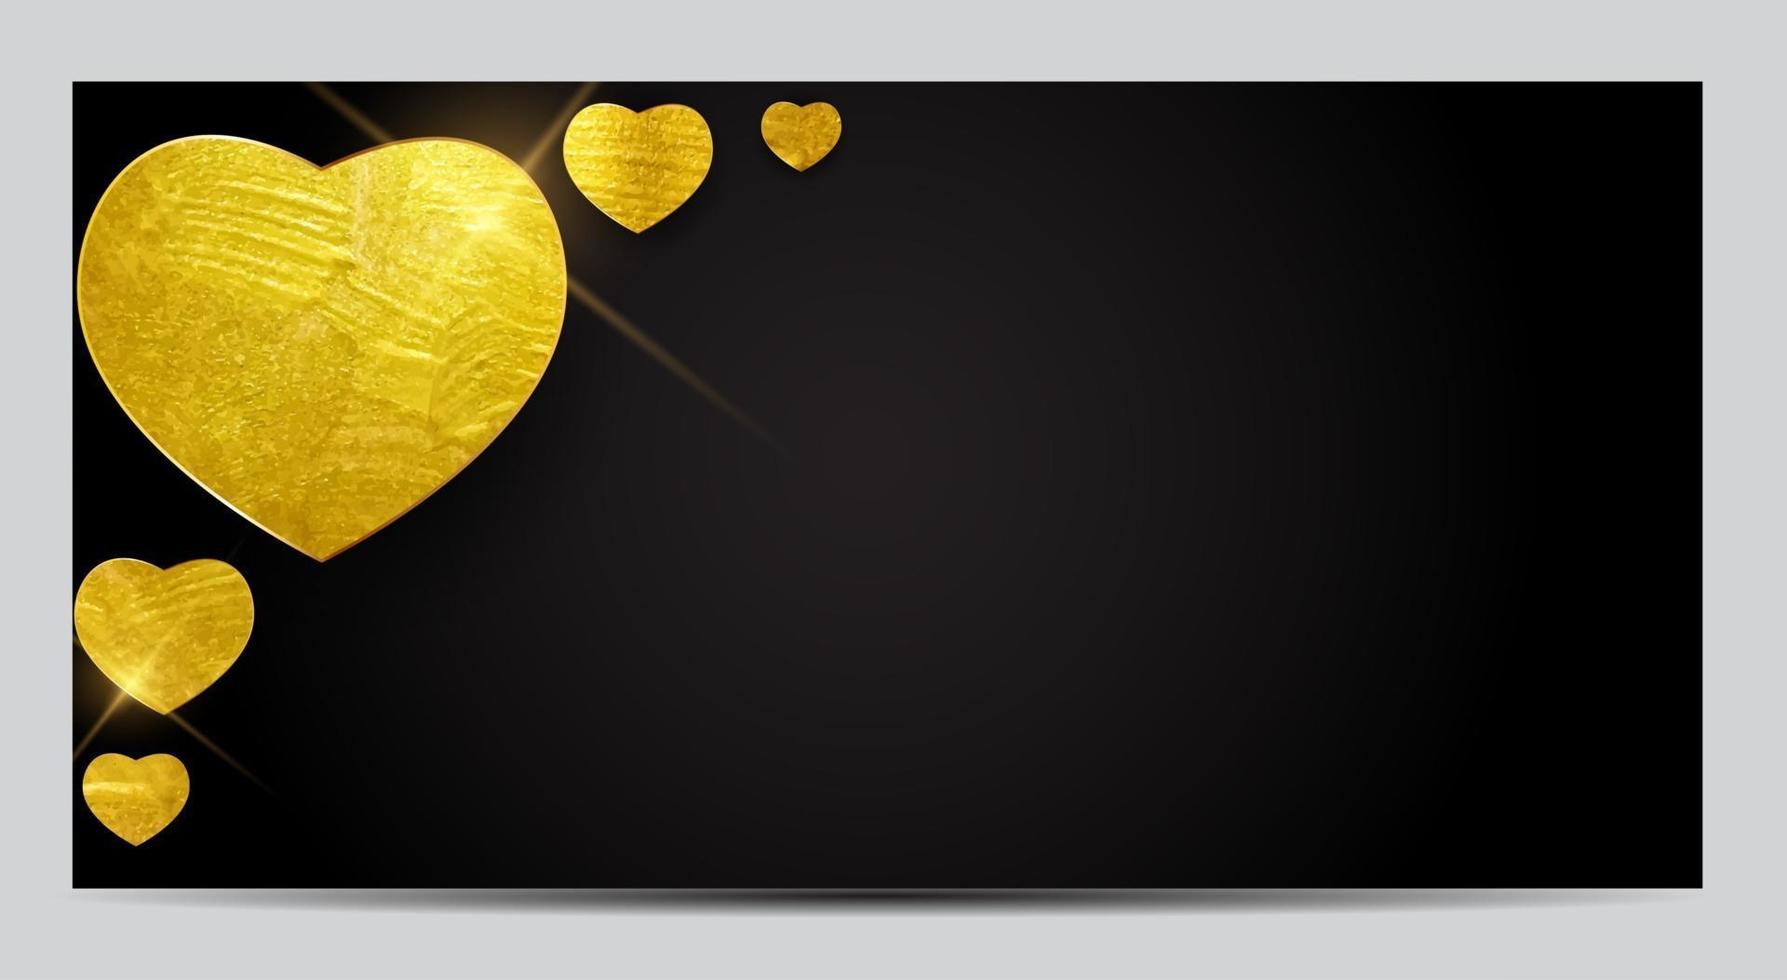 Gift Voucher Template For Your Business. Valentine's Day Heart Card Love and Feelings Background Design. vector